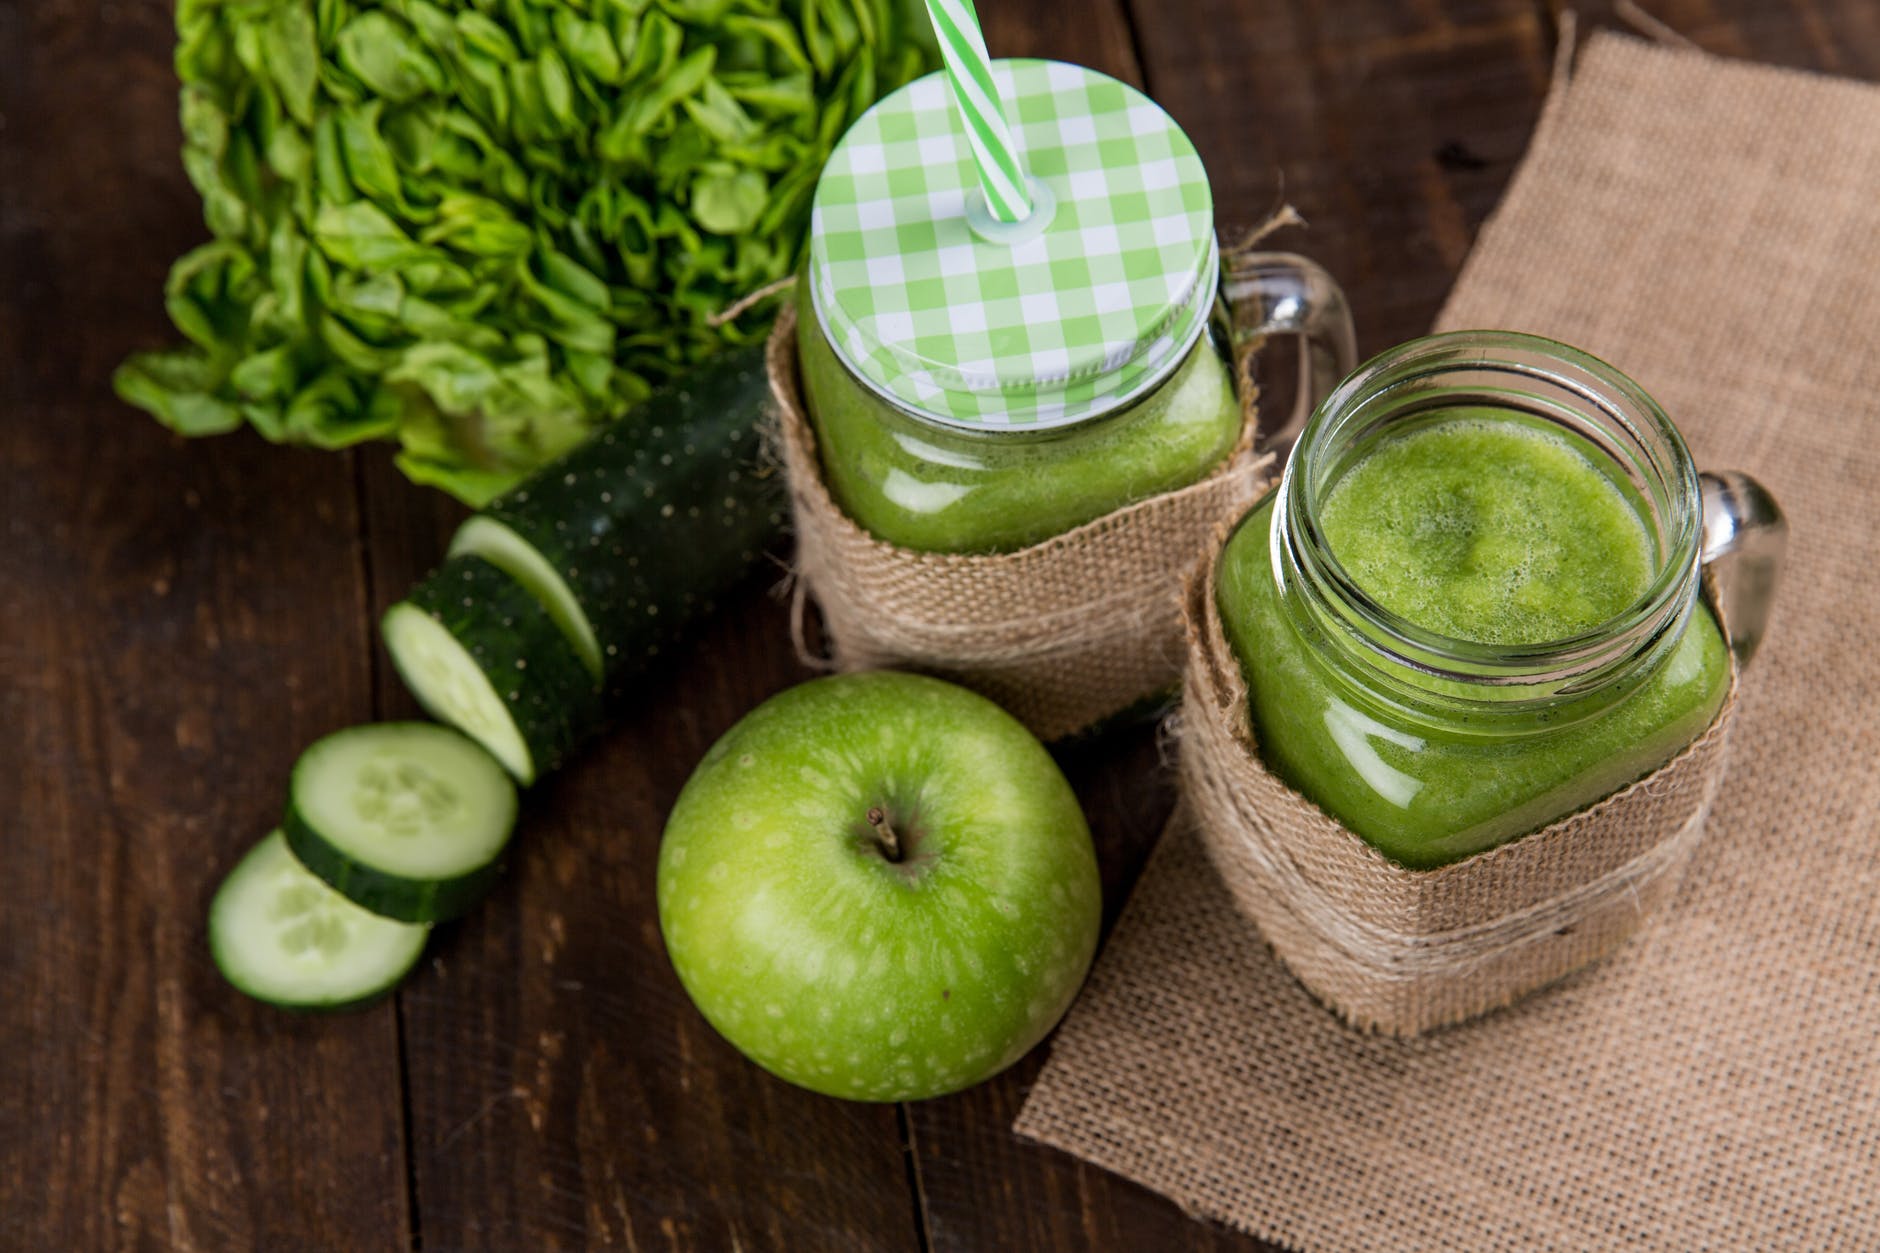 green apple beside of two clear glass jars